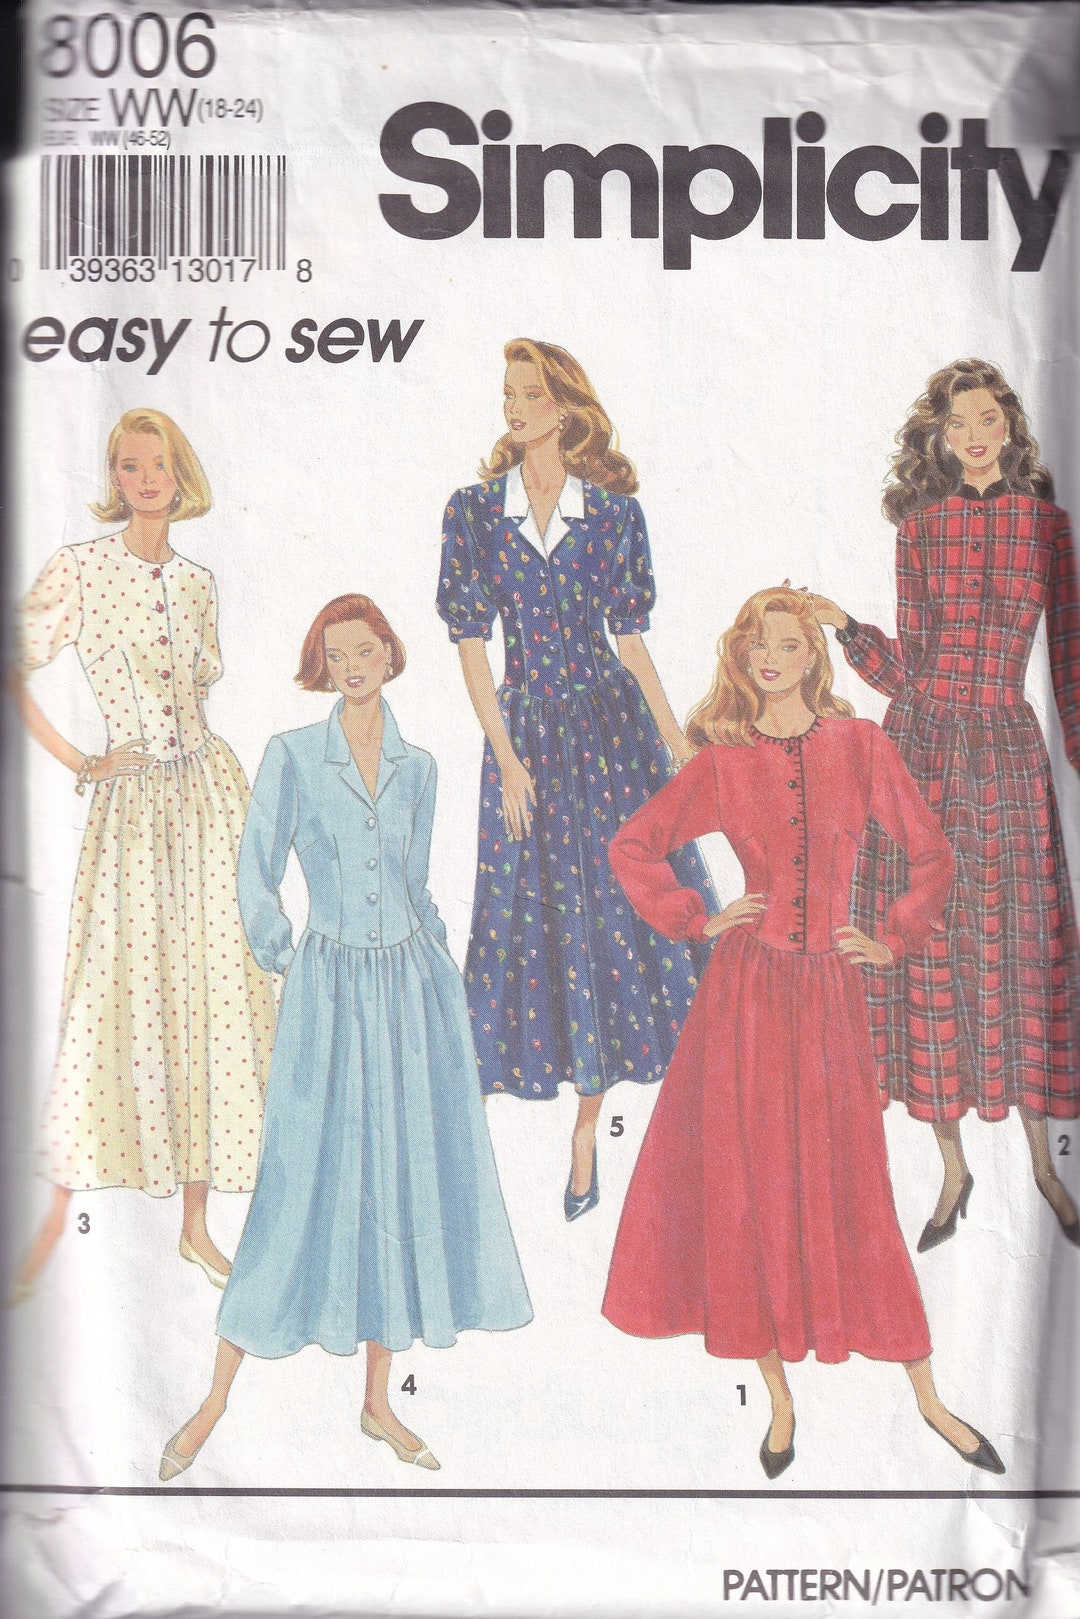 Simplicity Pattern 8006 From 1992. Misses Dress With Bodice - Etsy